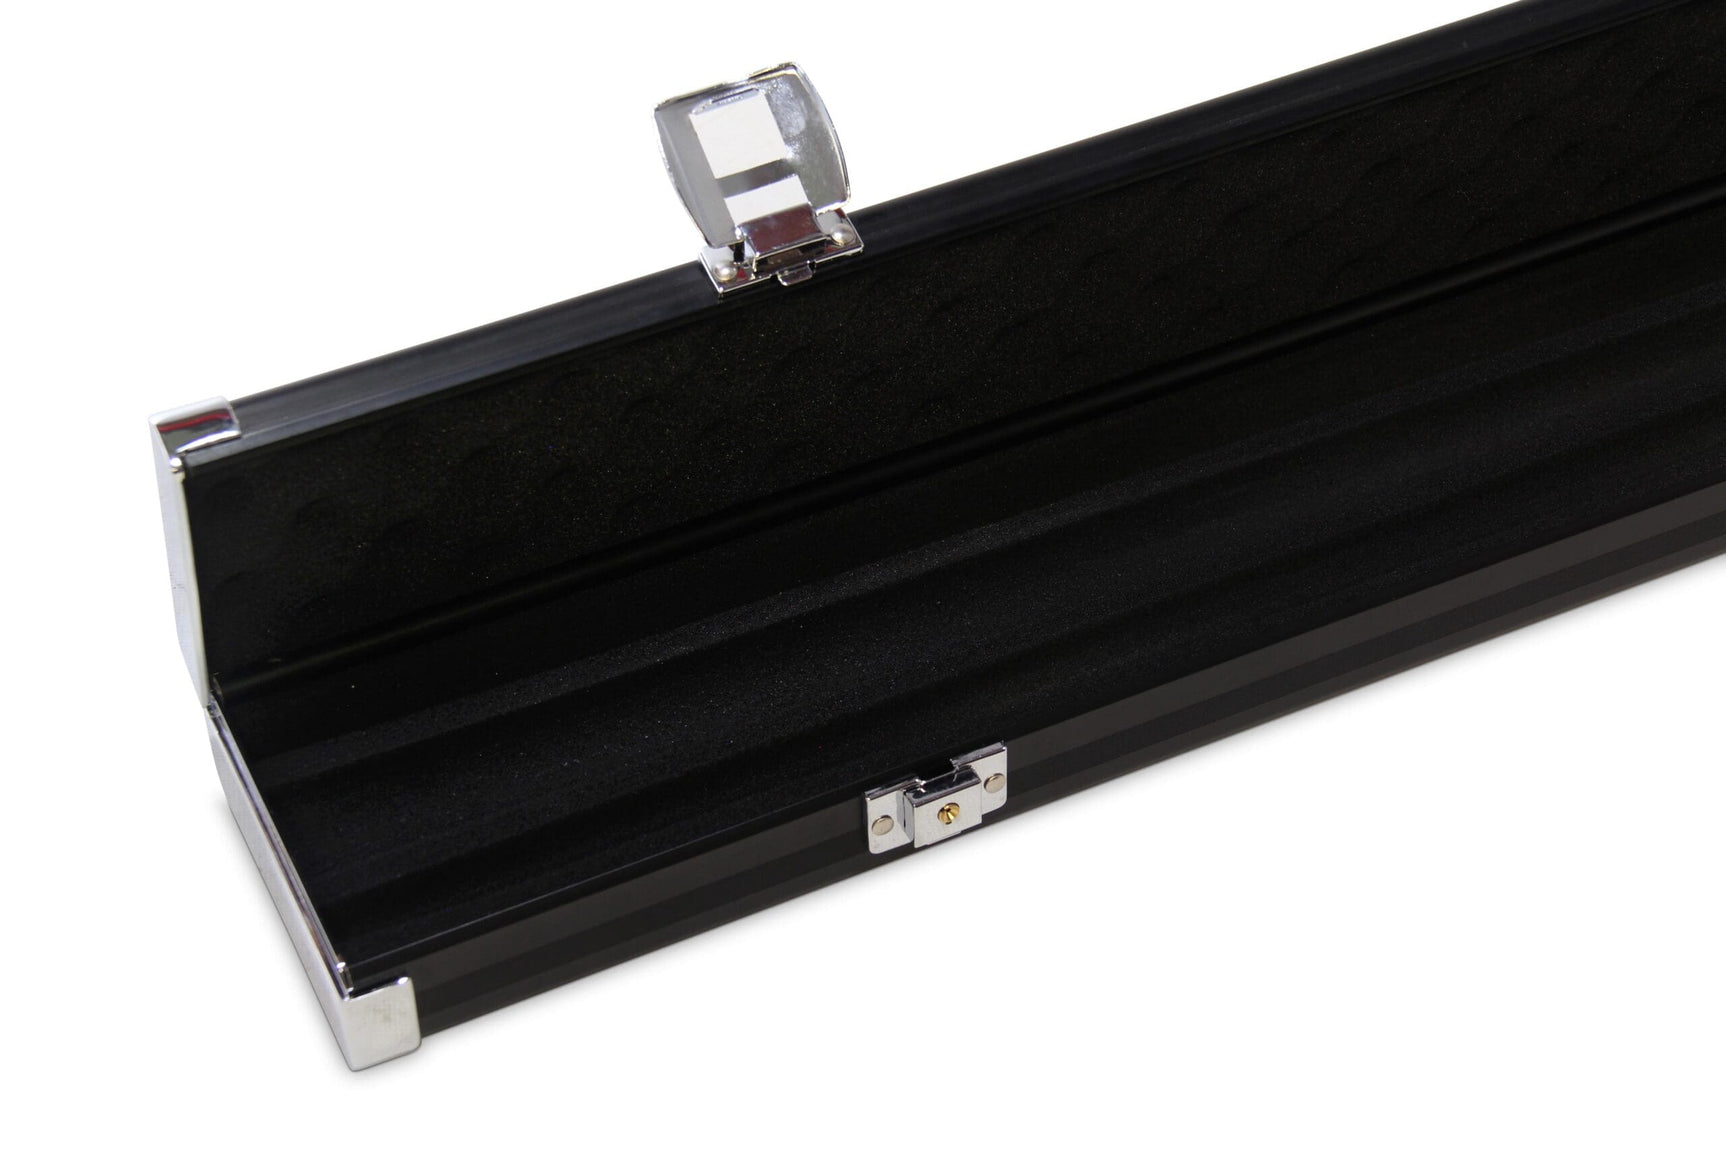 Baize Master 3/4 Black 3 Slot LOCKABLE Metal Ends Snooker Pool Cue Case - Holds 2 Cues